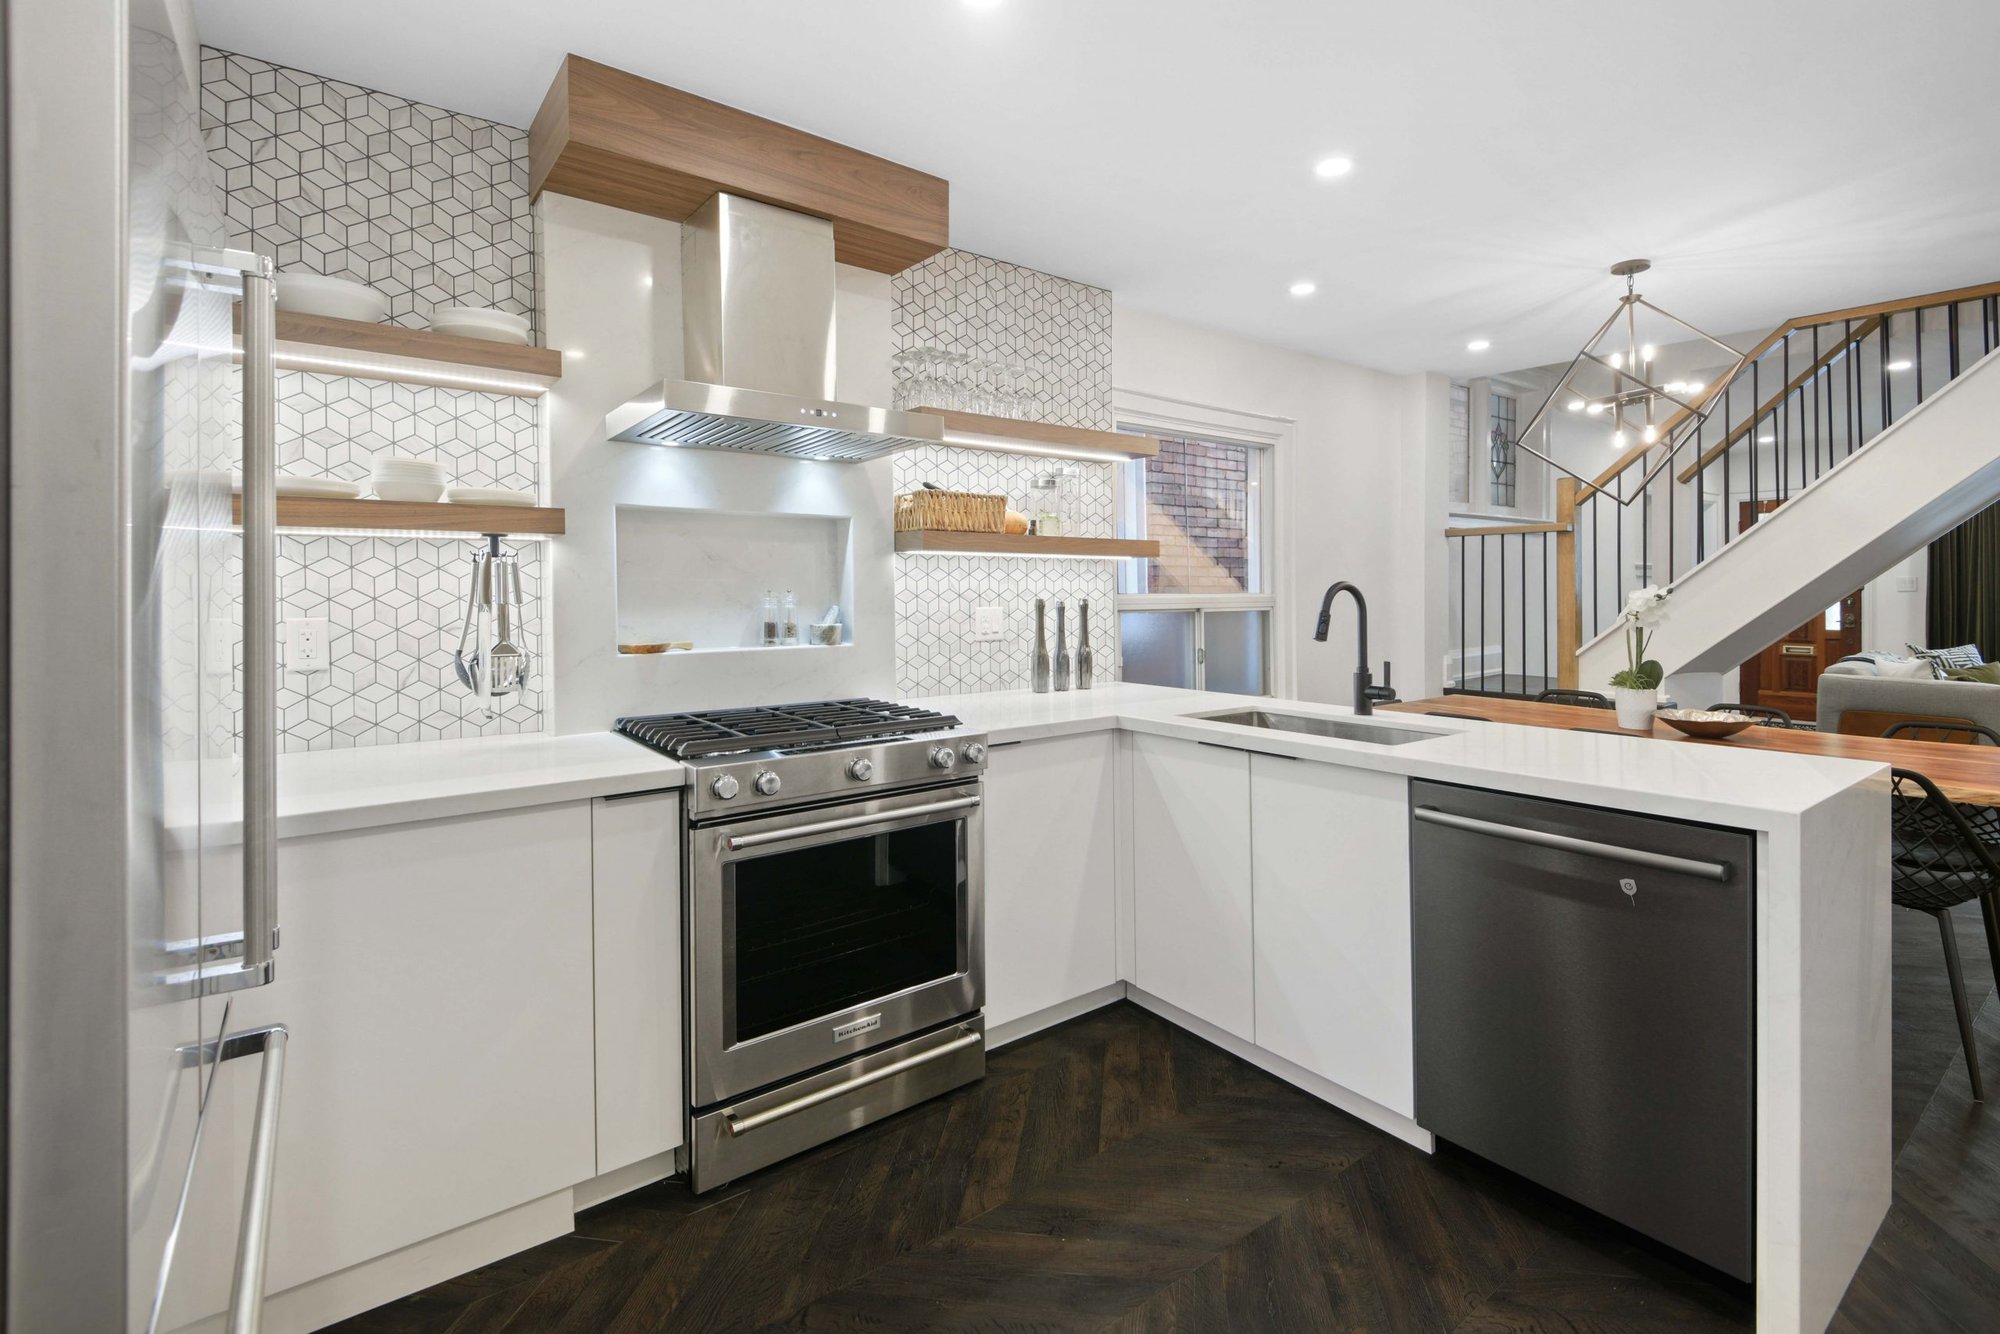 Kitchen Renovation Completed By Sosna Inc., Holmes Approved Renovator